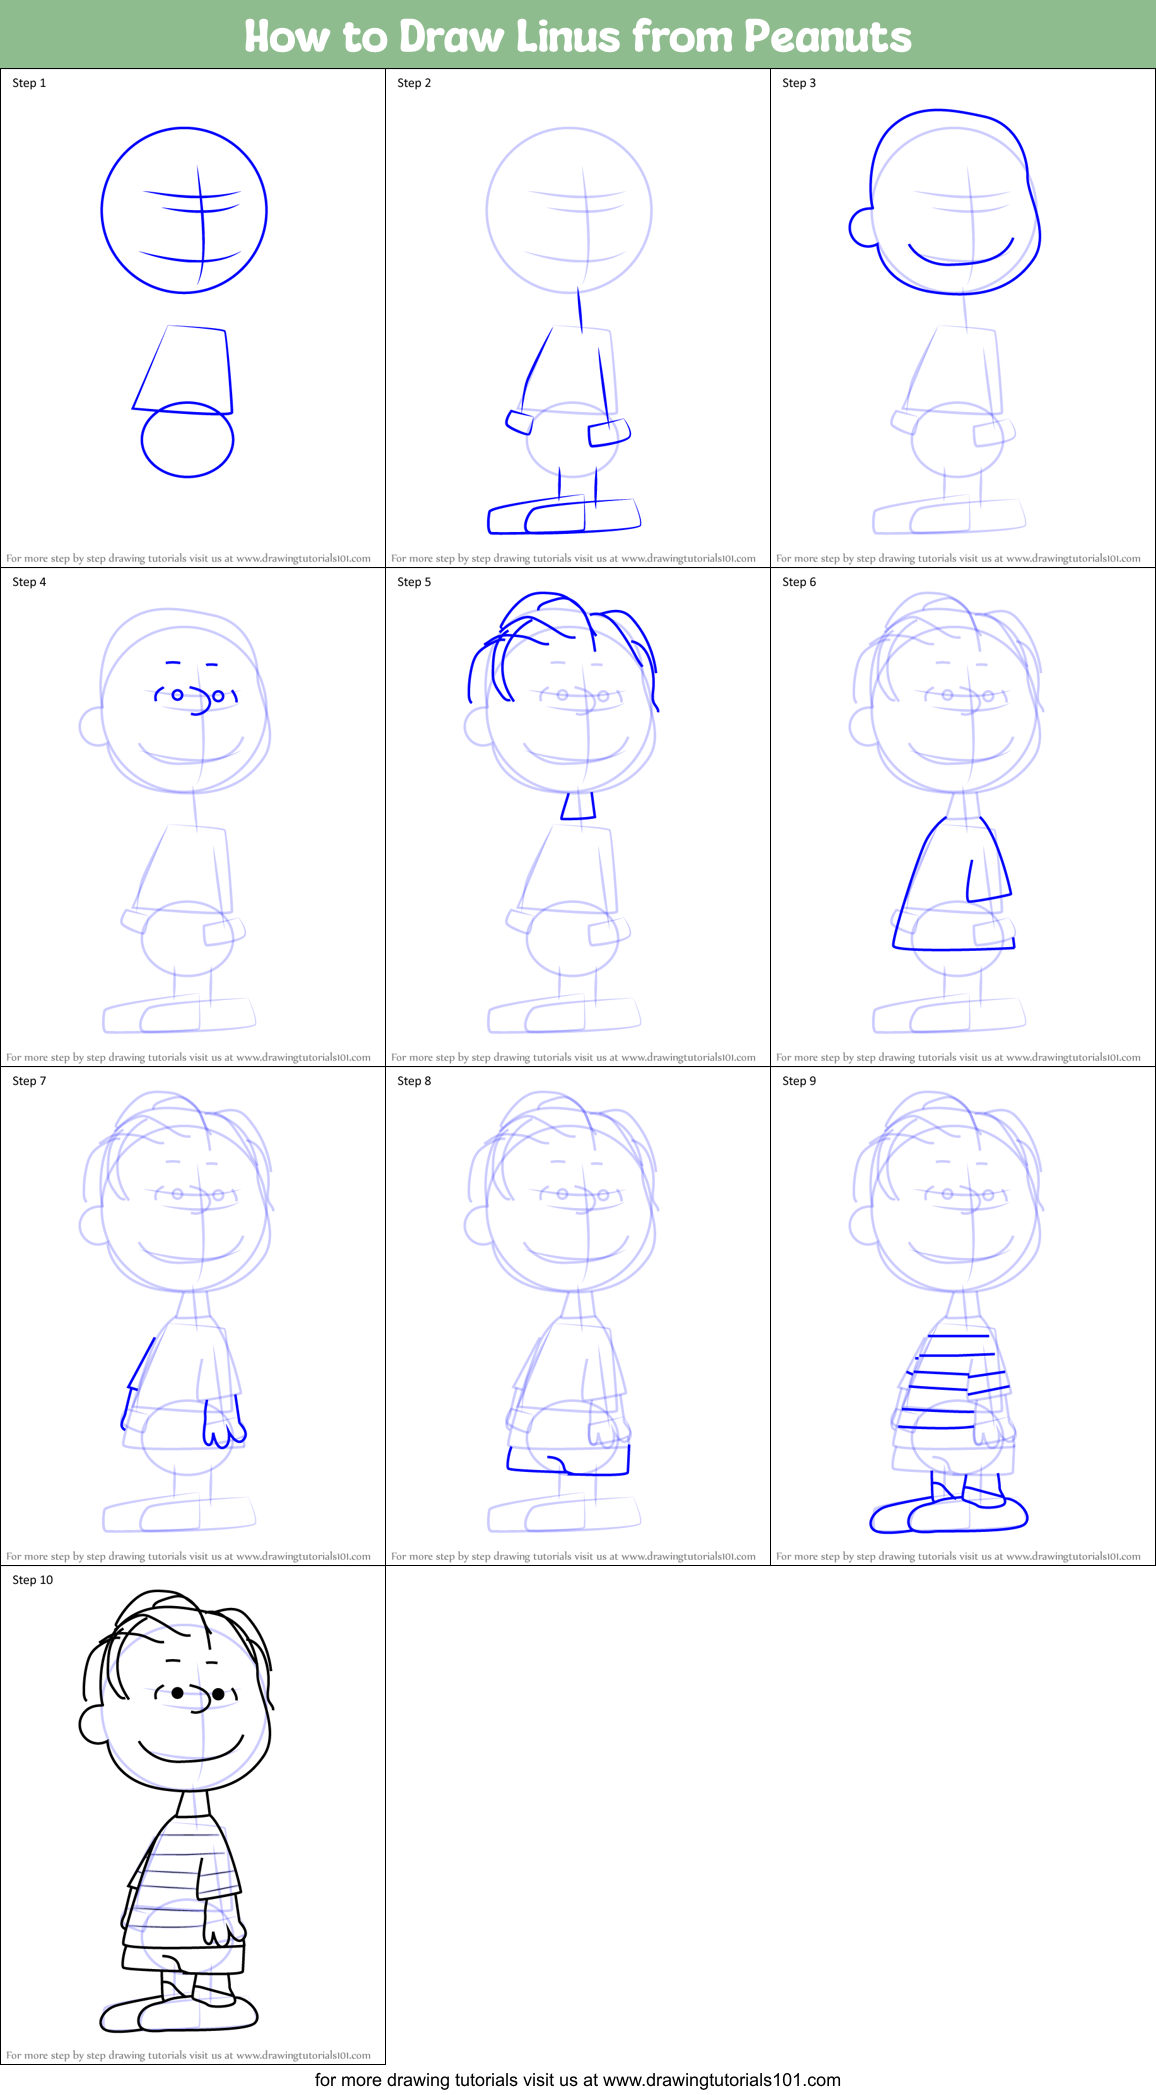 How to Draw Linus from Peanuts printable step by step drawing sheet